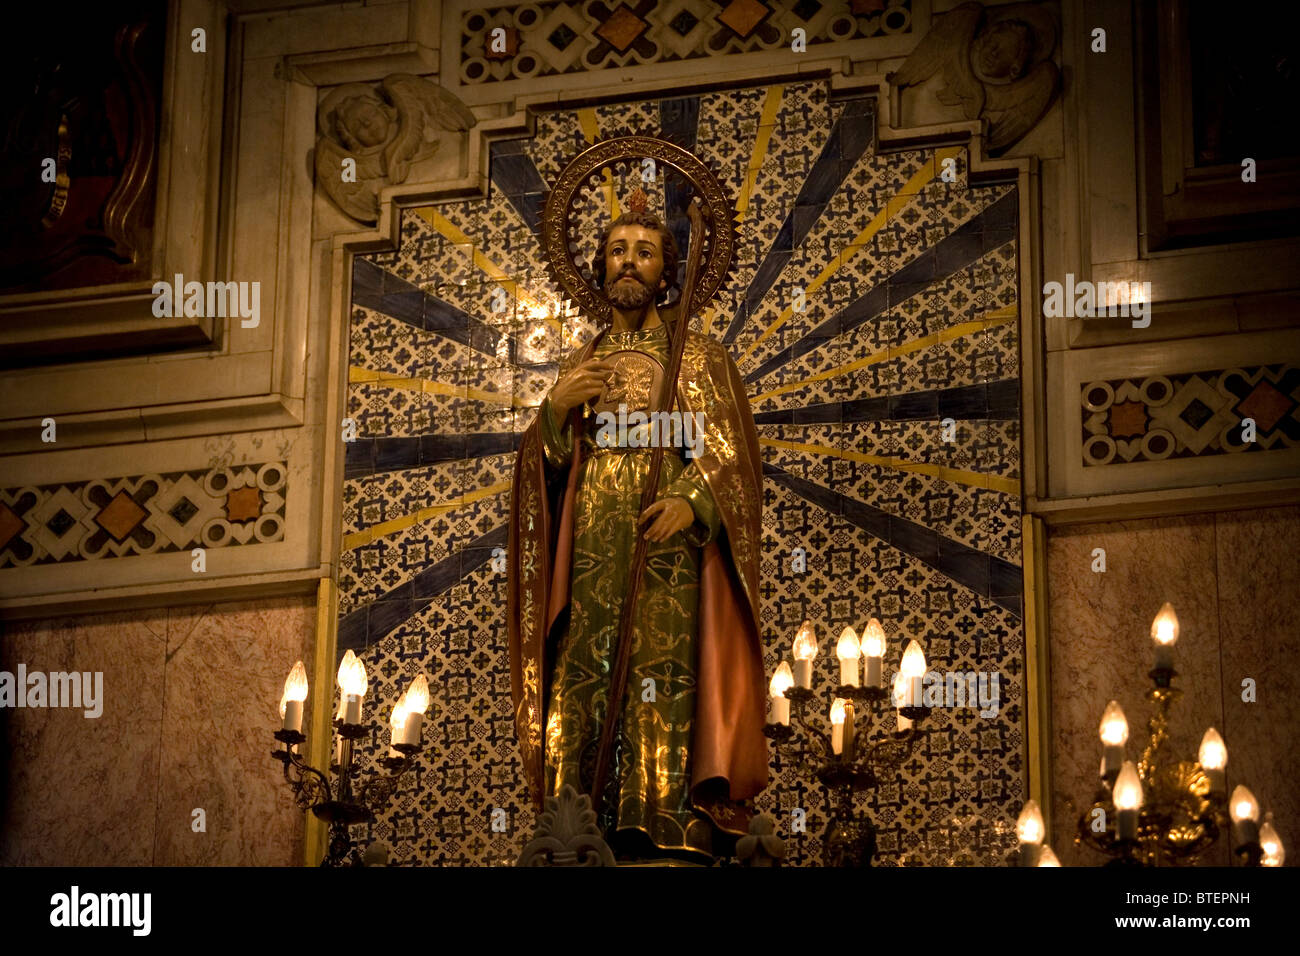 A sculpture of Saint Jude Thaddeus is displayed in the main altar of San Hipolito's church in Mexico City Stock Photo